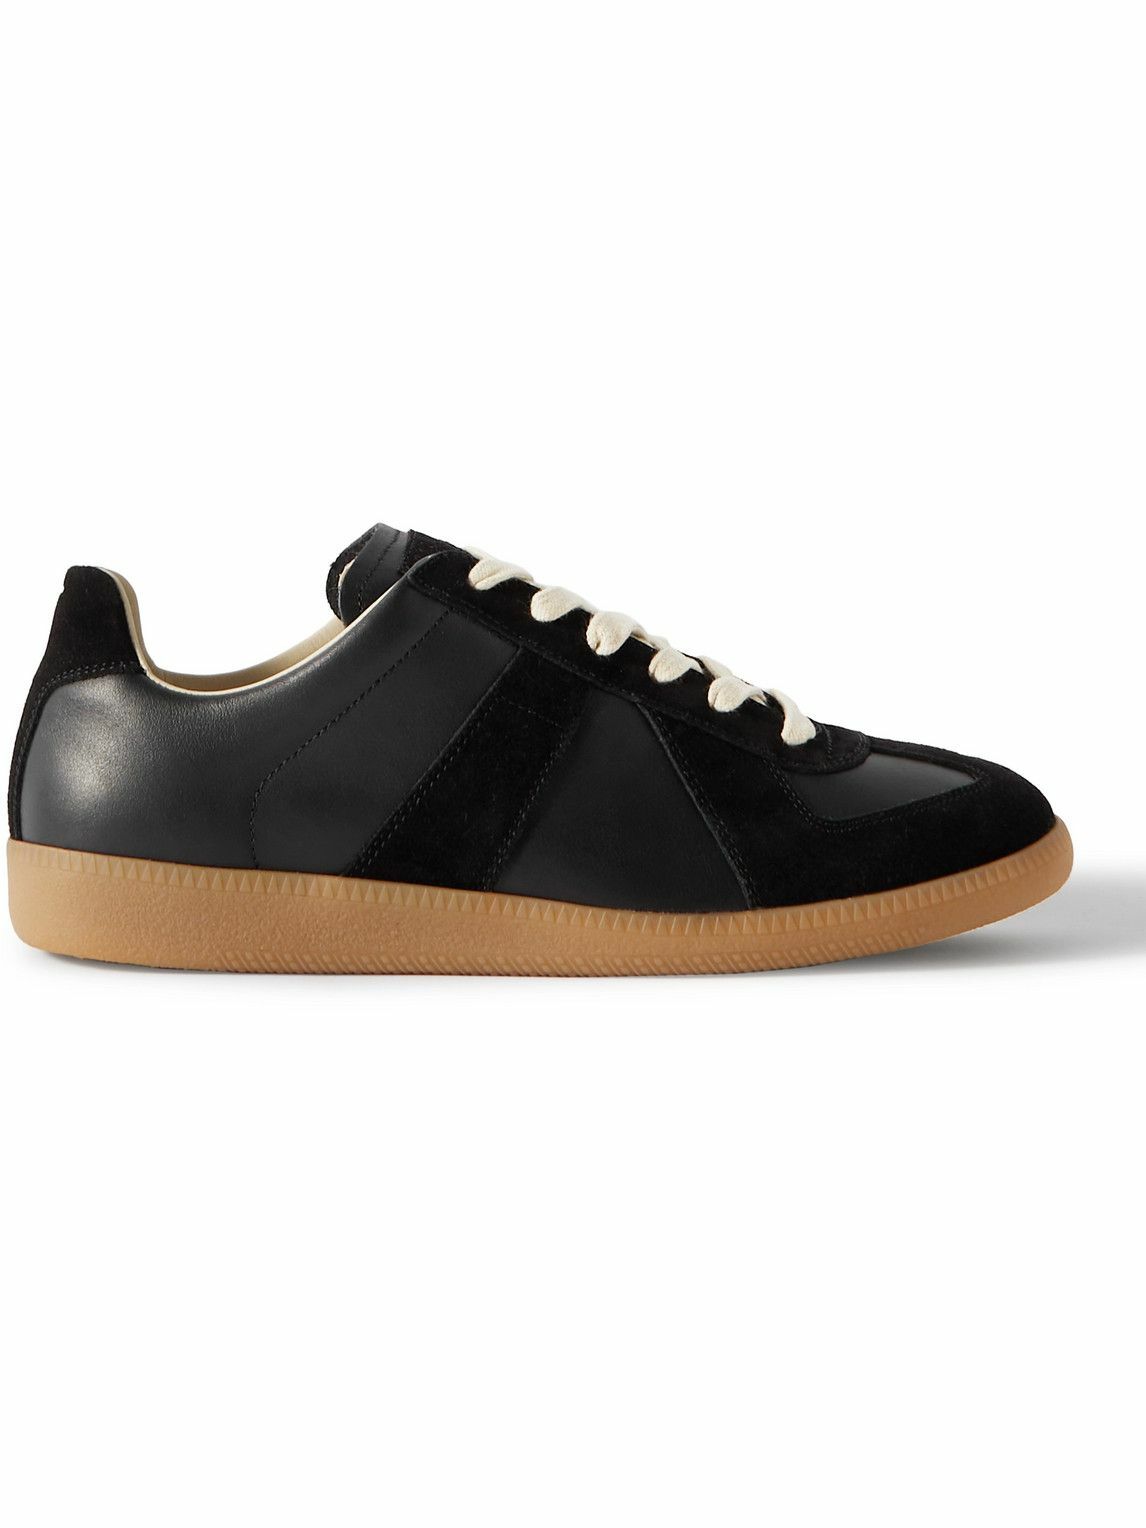 Maison Margiela - Replica Leather and Suede Sneakers - Black Maison ...